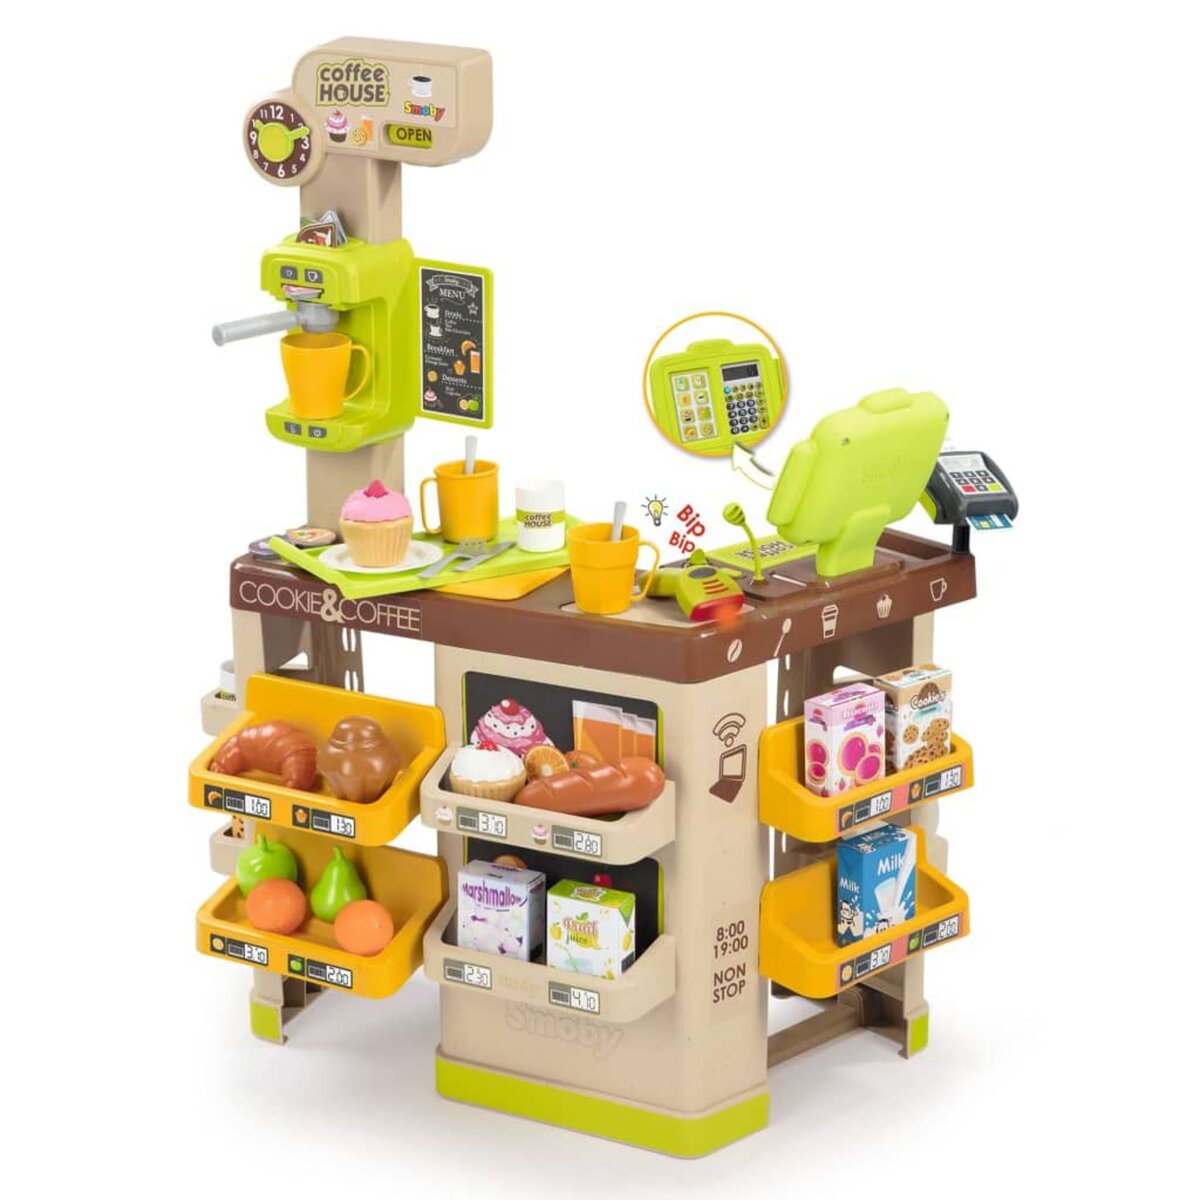 SMOBY Smoby Cafe-bar jouet pas cher 